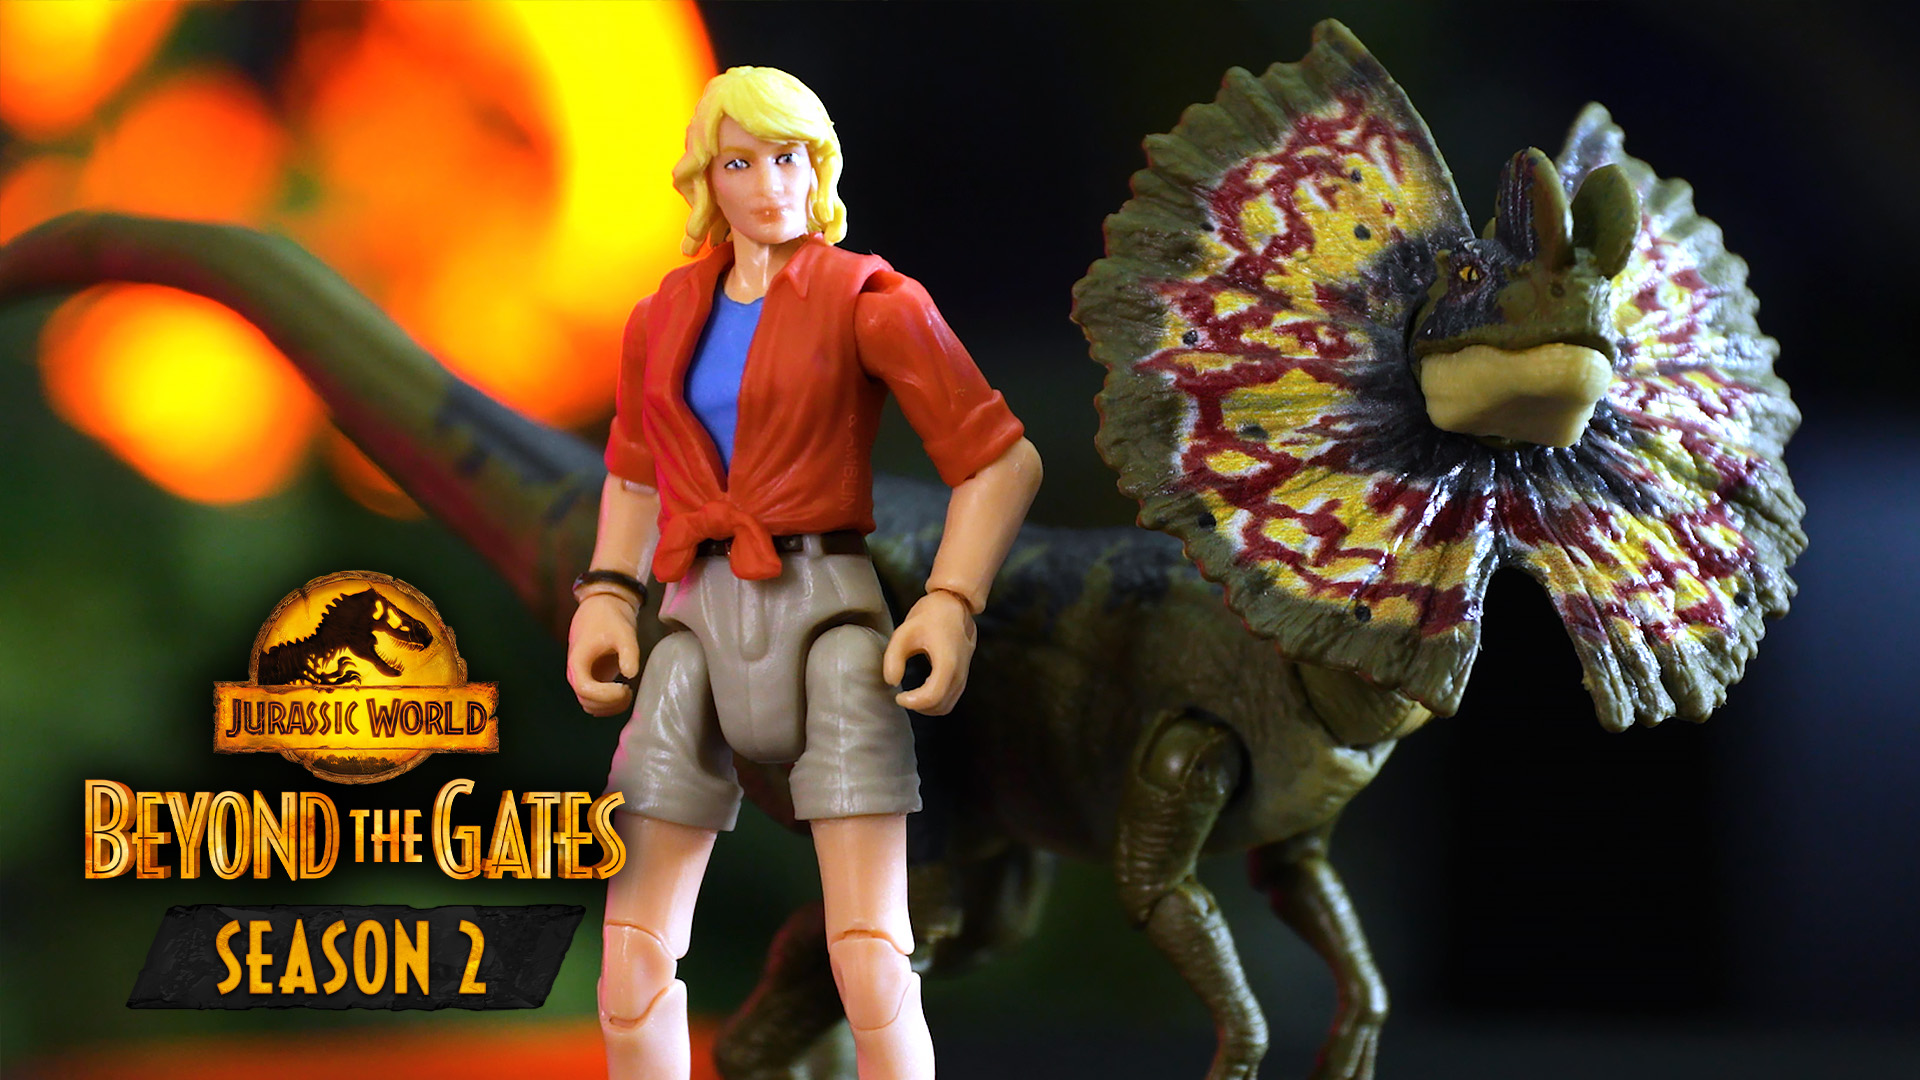 Dilophosaurus & Dr. Ellie Sattler Join The Hammond Collection in New BEYOND THE GATES Episode!